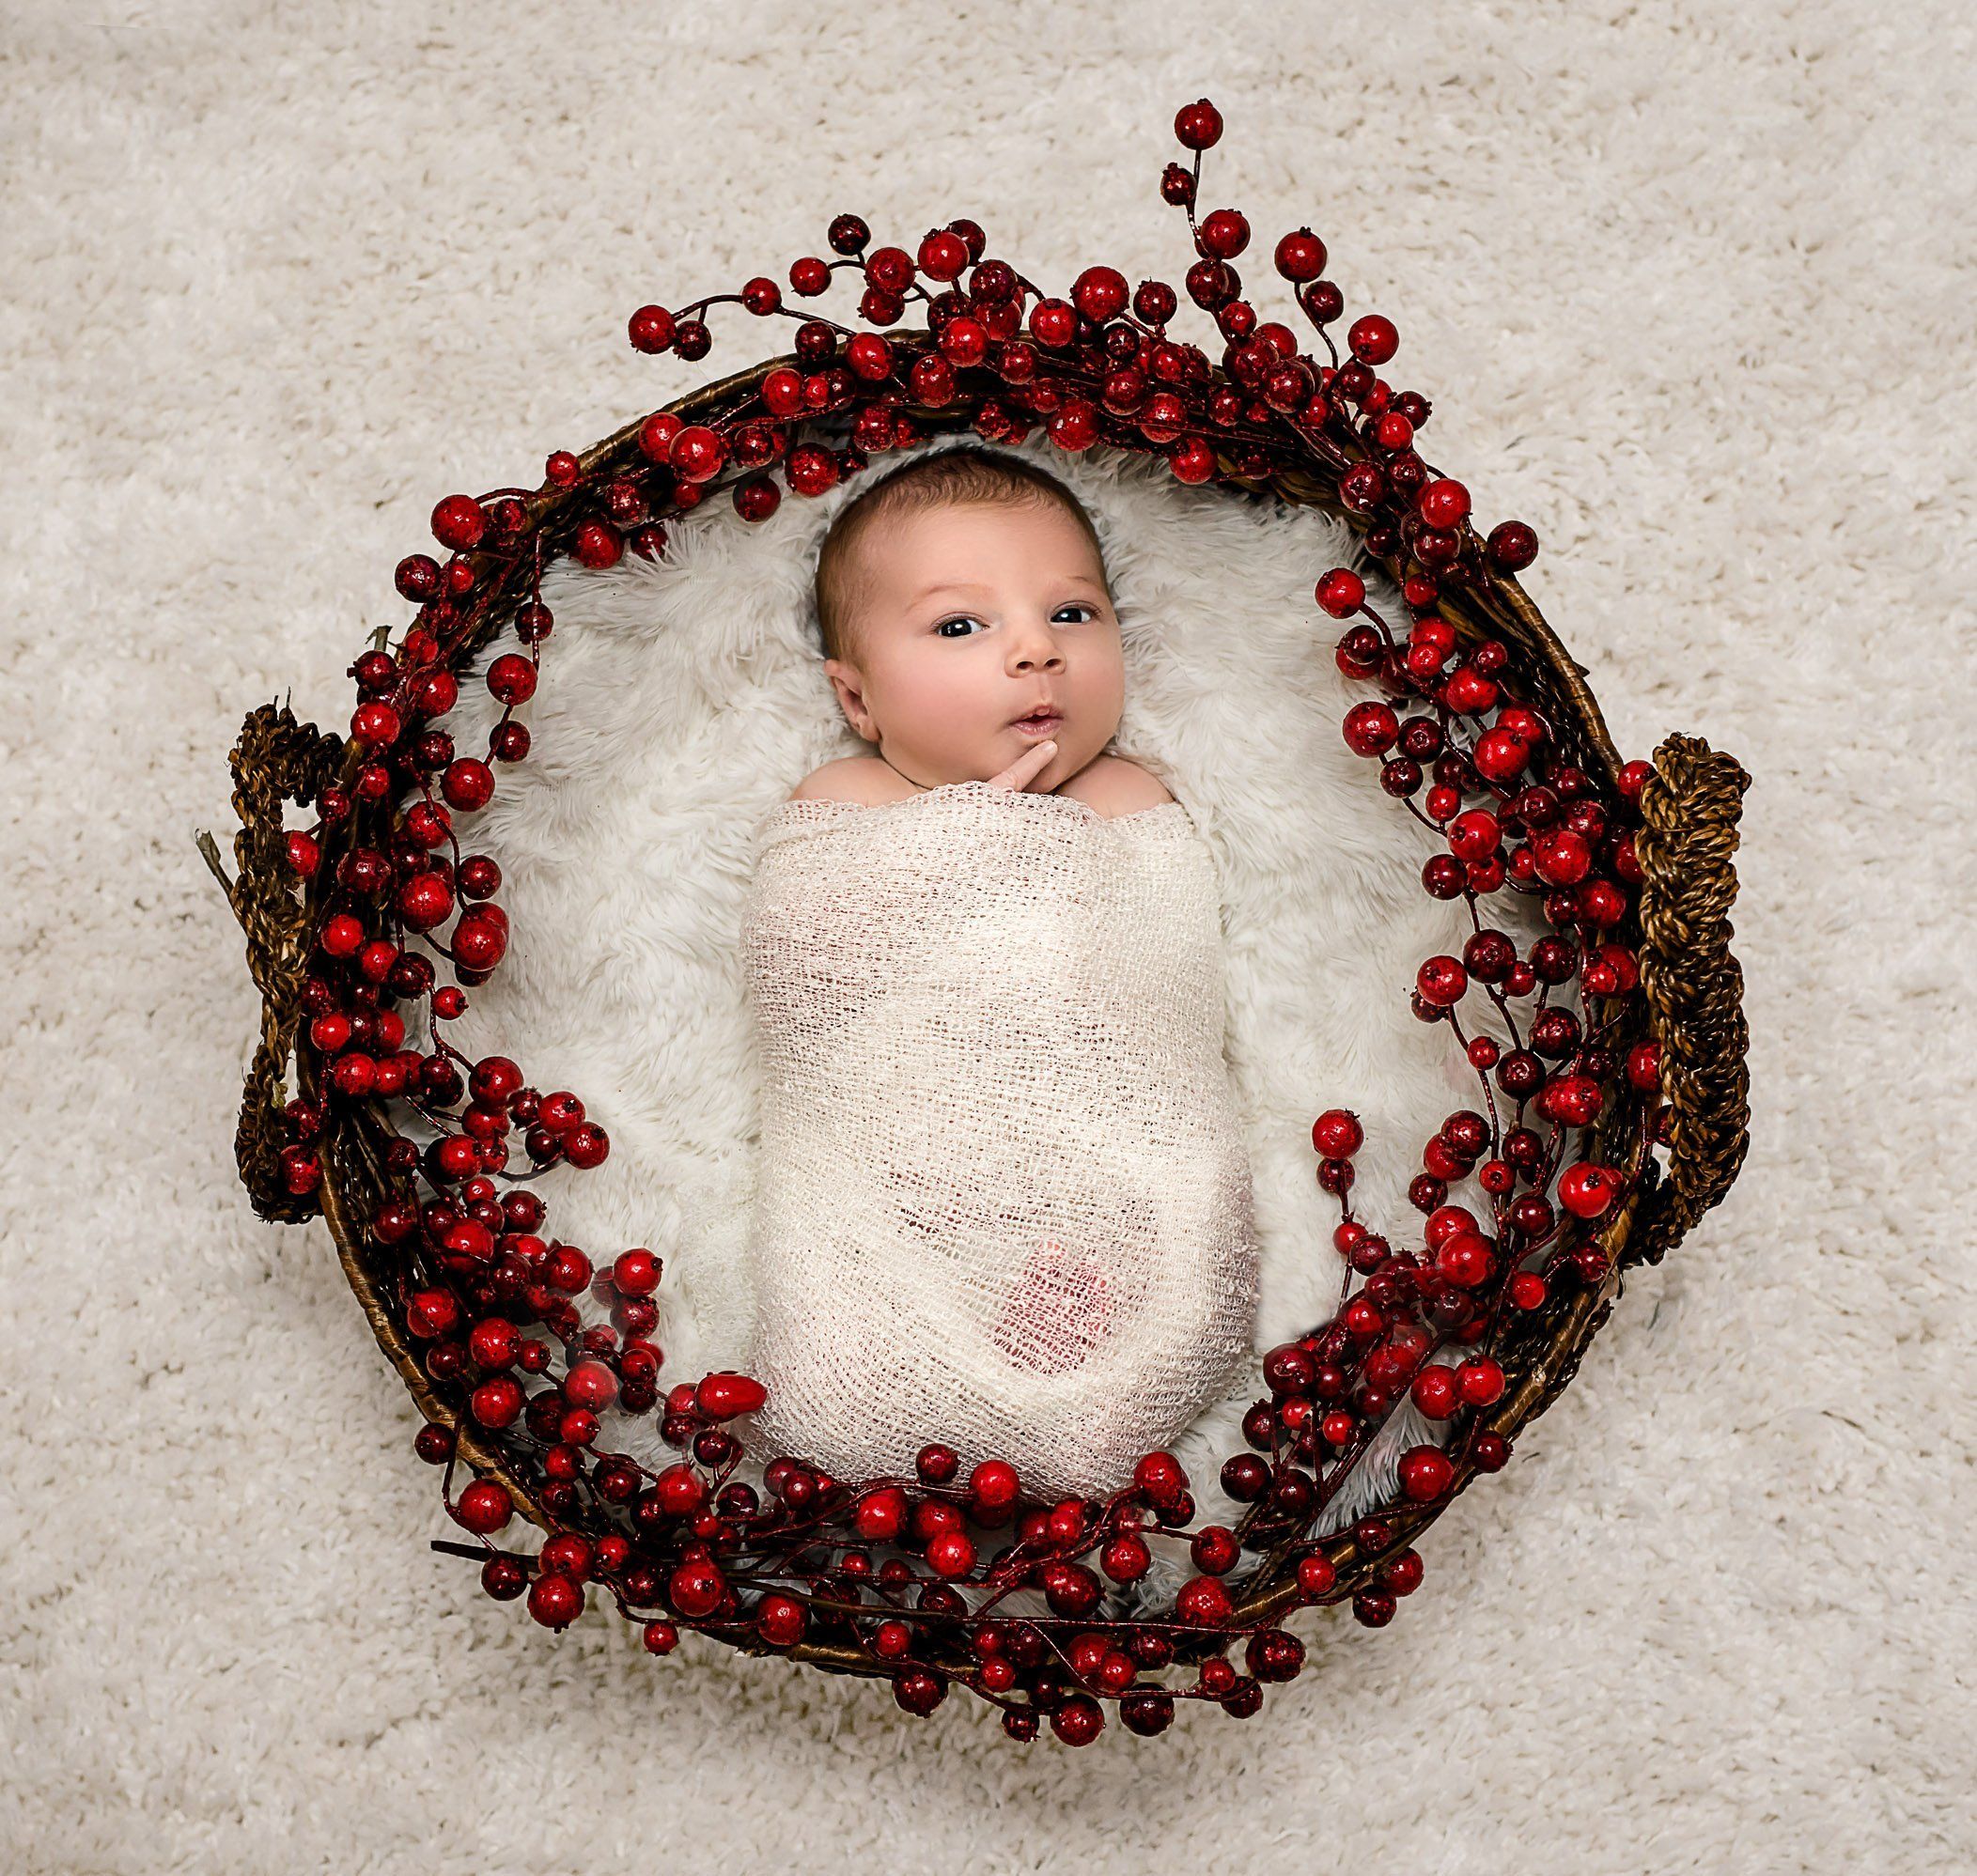 newborn baby wrapped in white blanket lying in a basket surrounded by christmas berries Glastonbury CT Newborn Photographer One Big Happy Photo www.onebighappyphoto.com/newborns